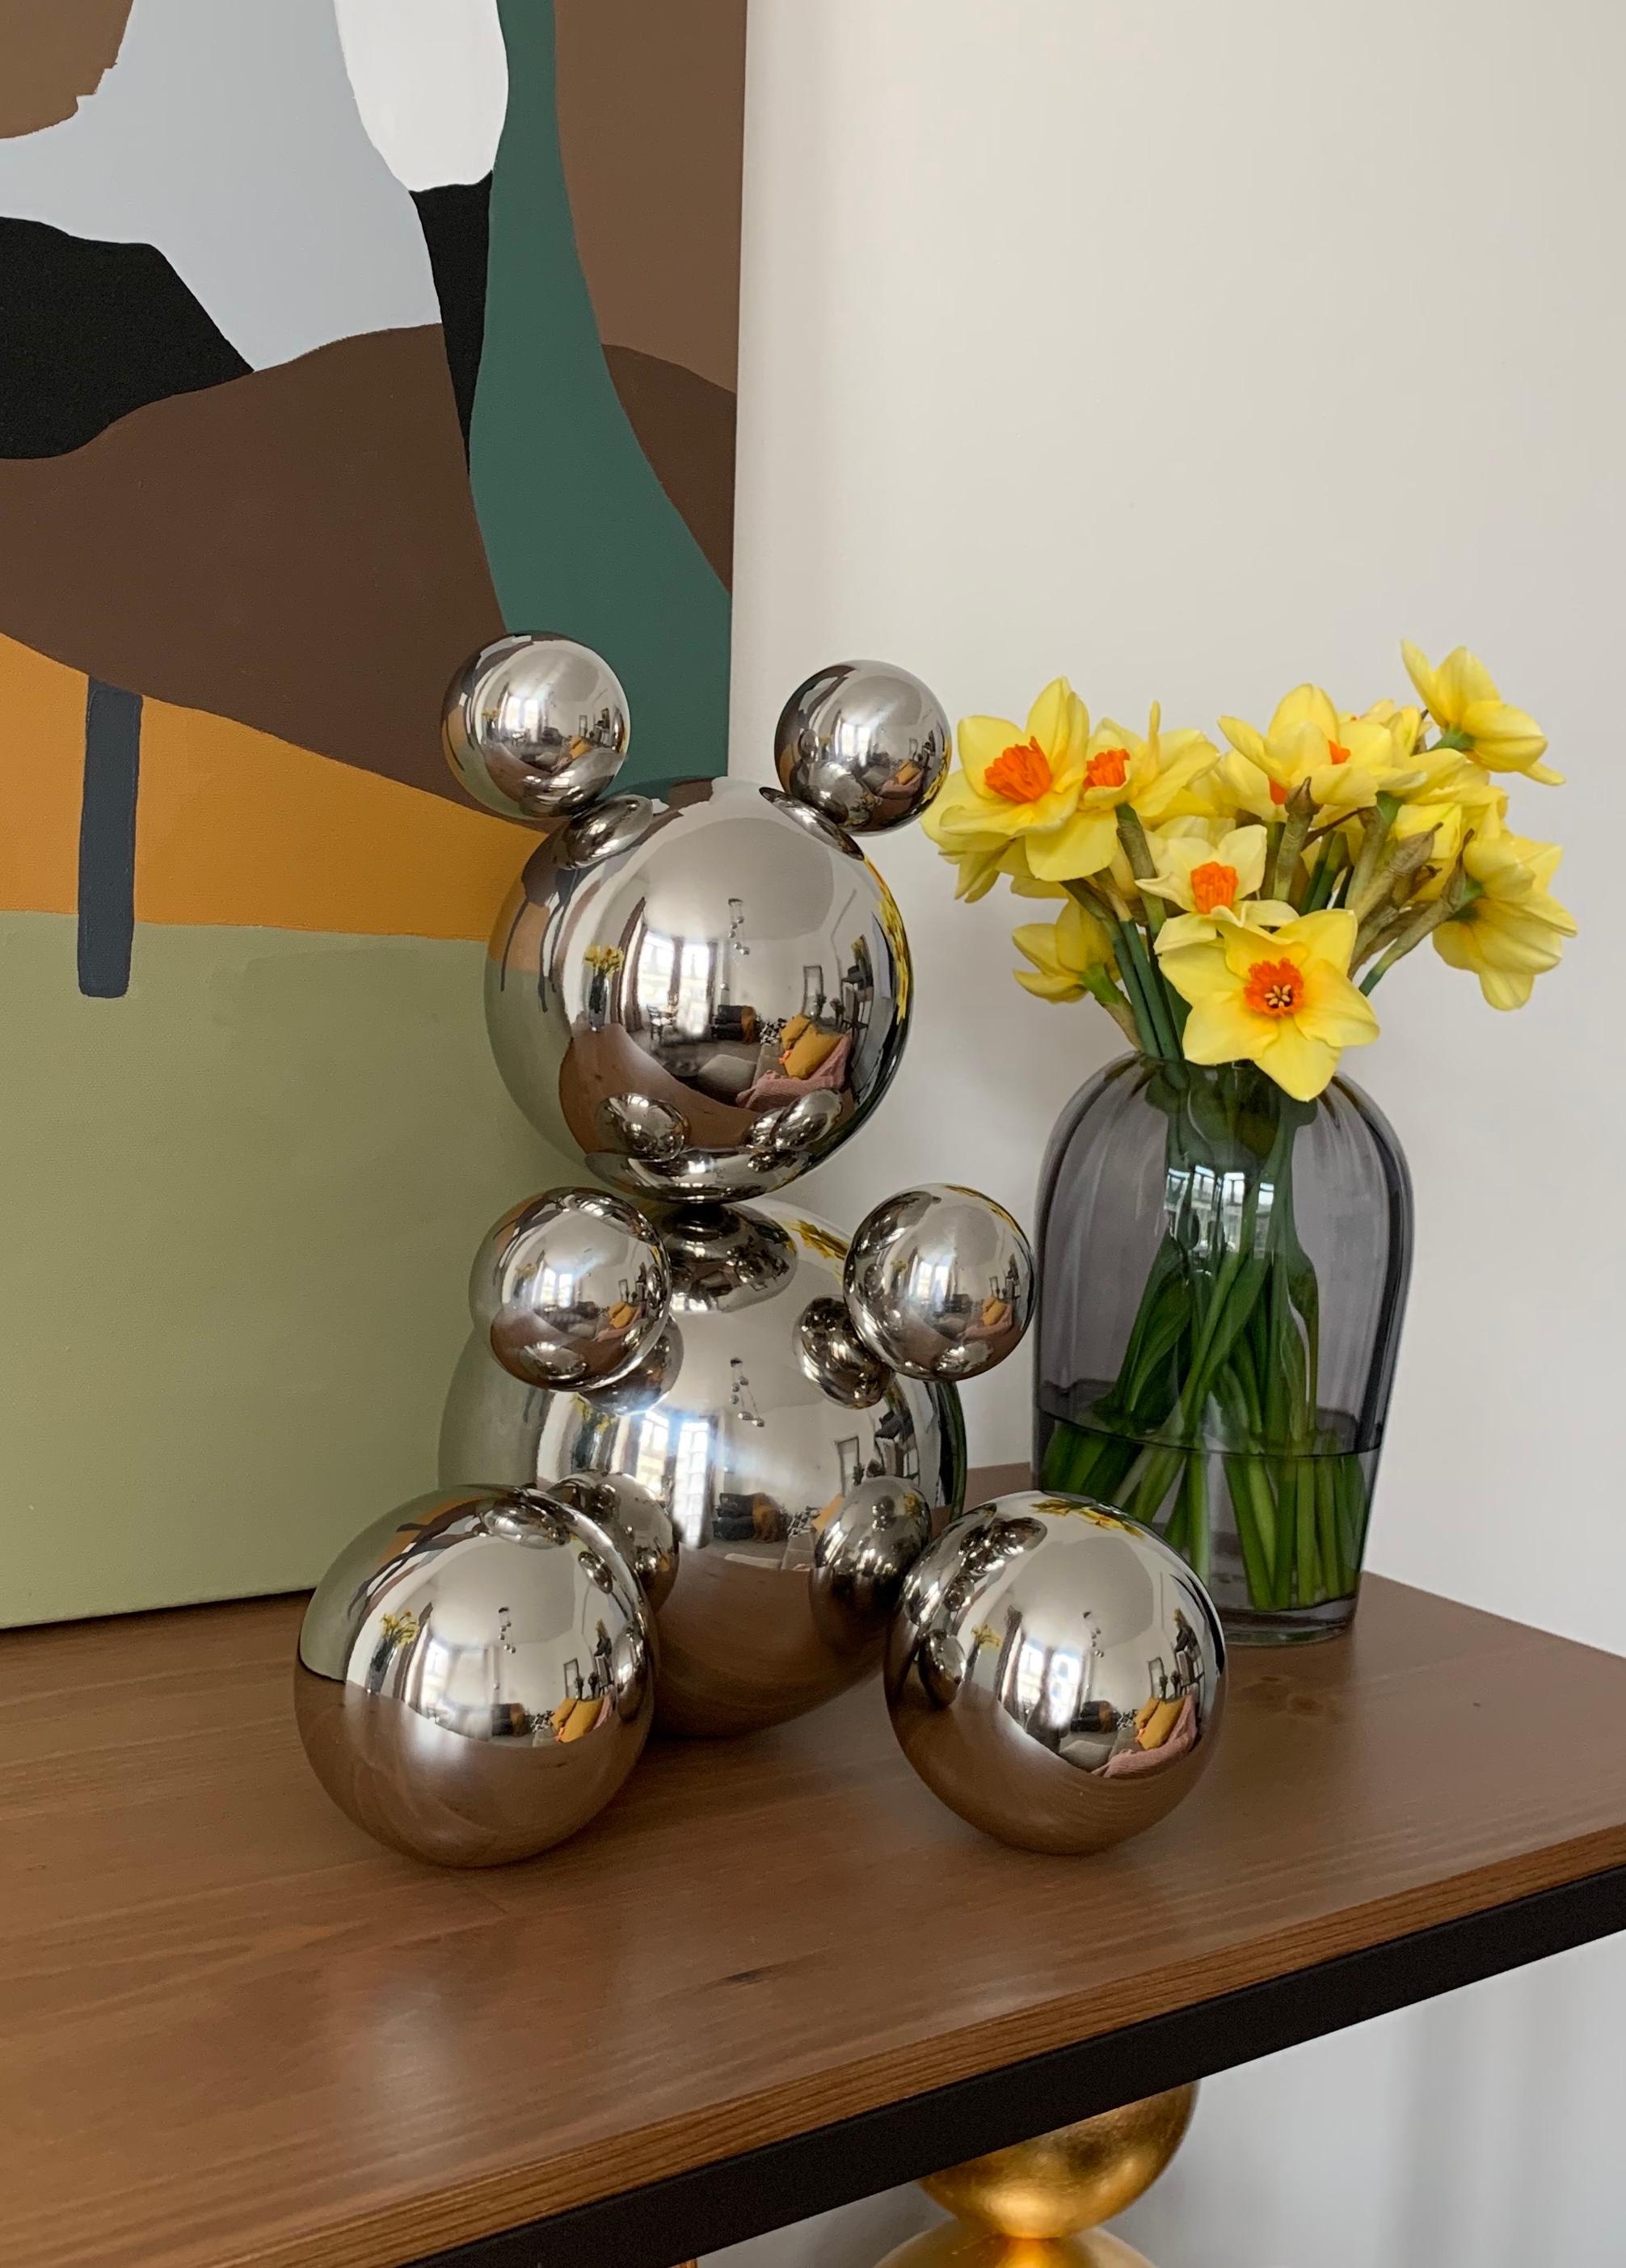 Middle Stainless Steel Bear 'Oliver' Sculpture Minimalistic Animal 1